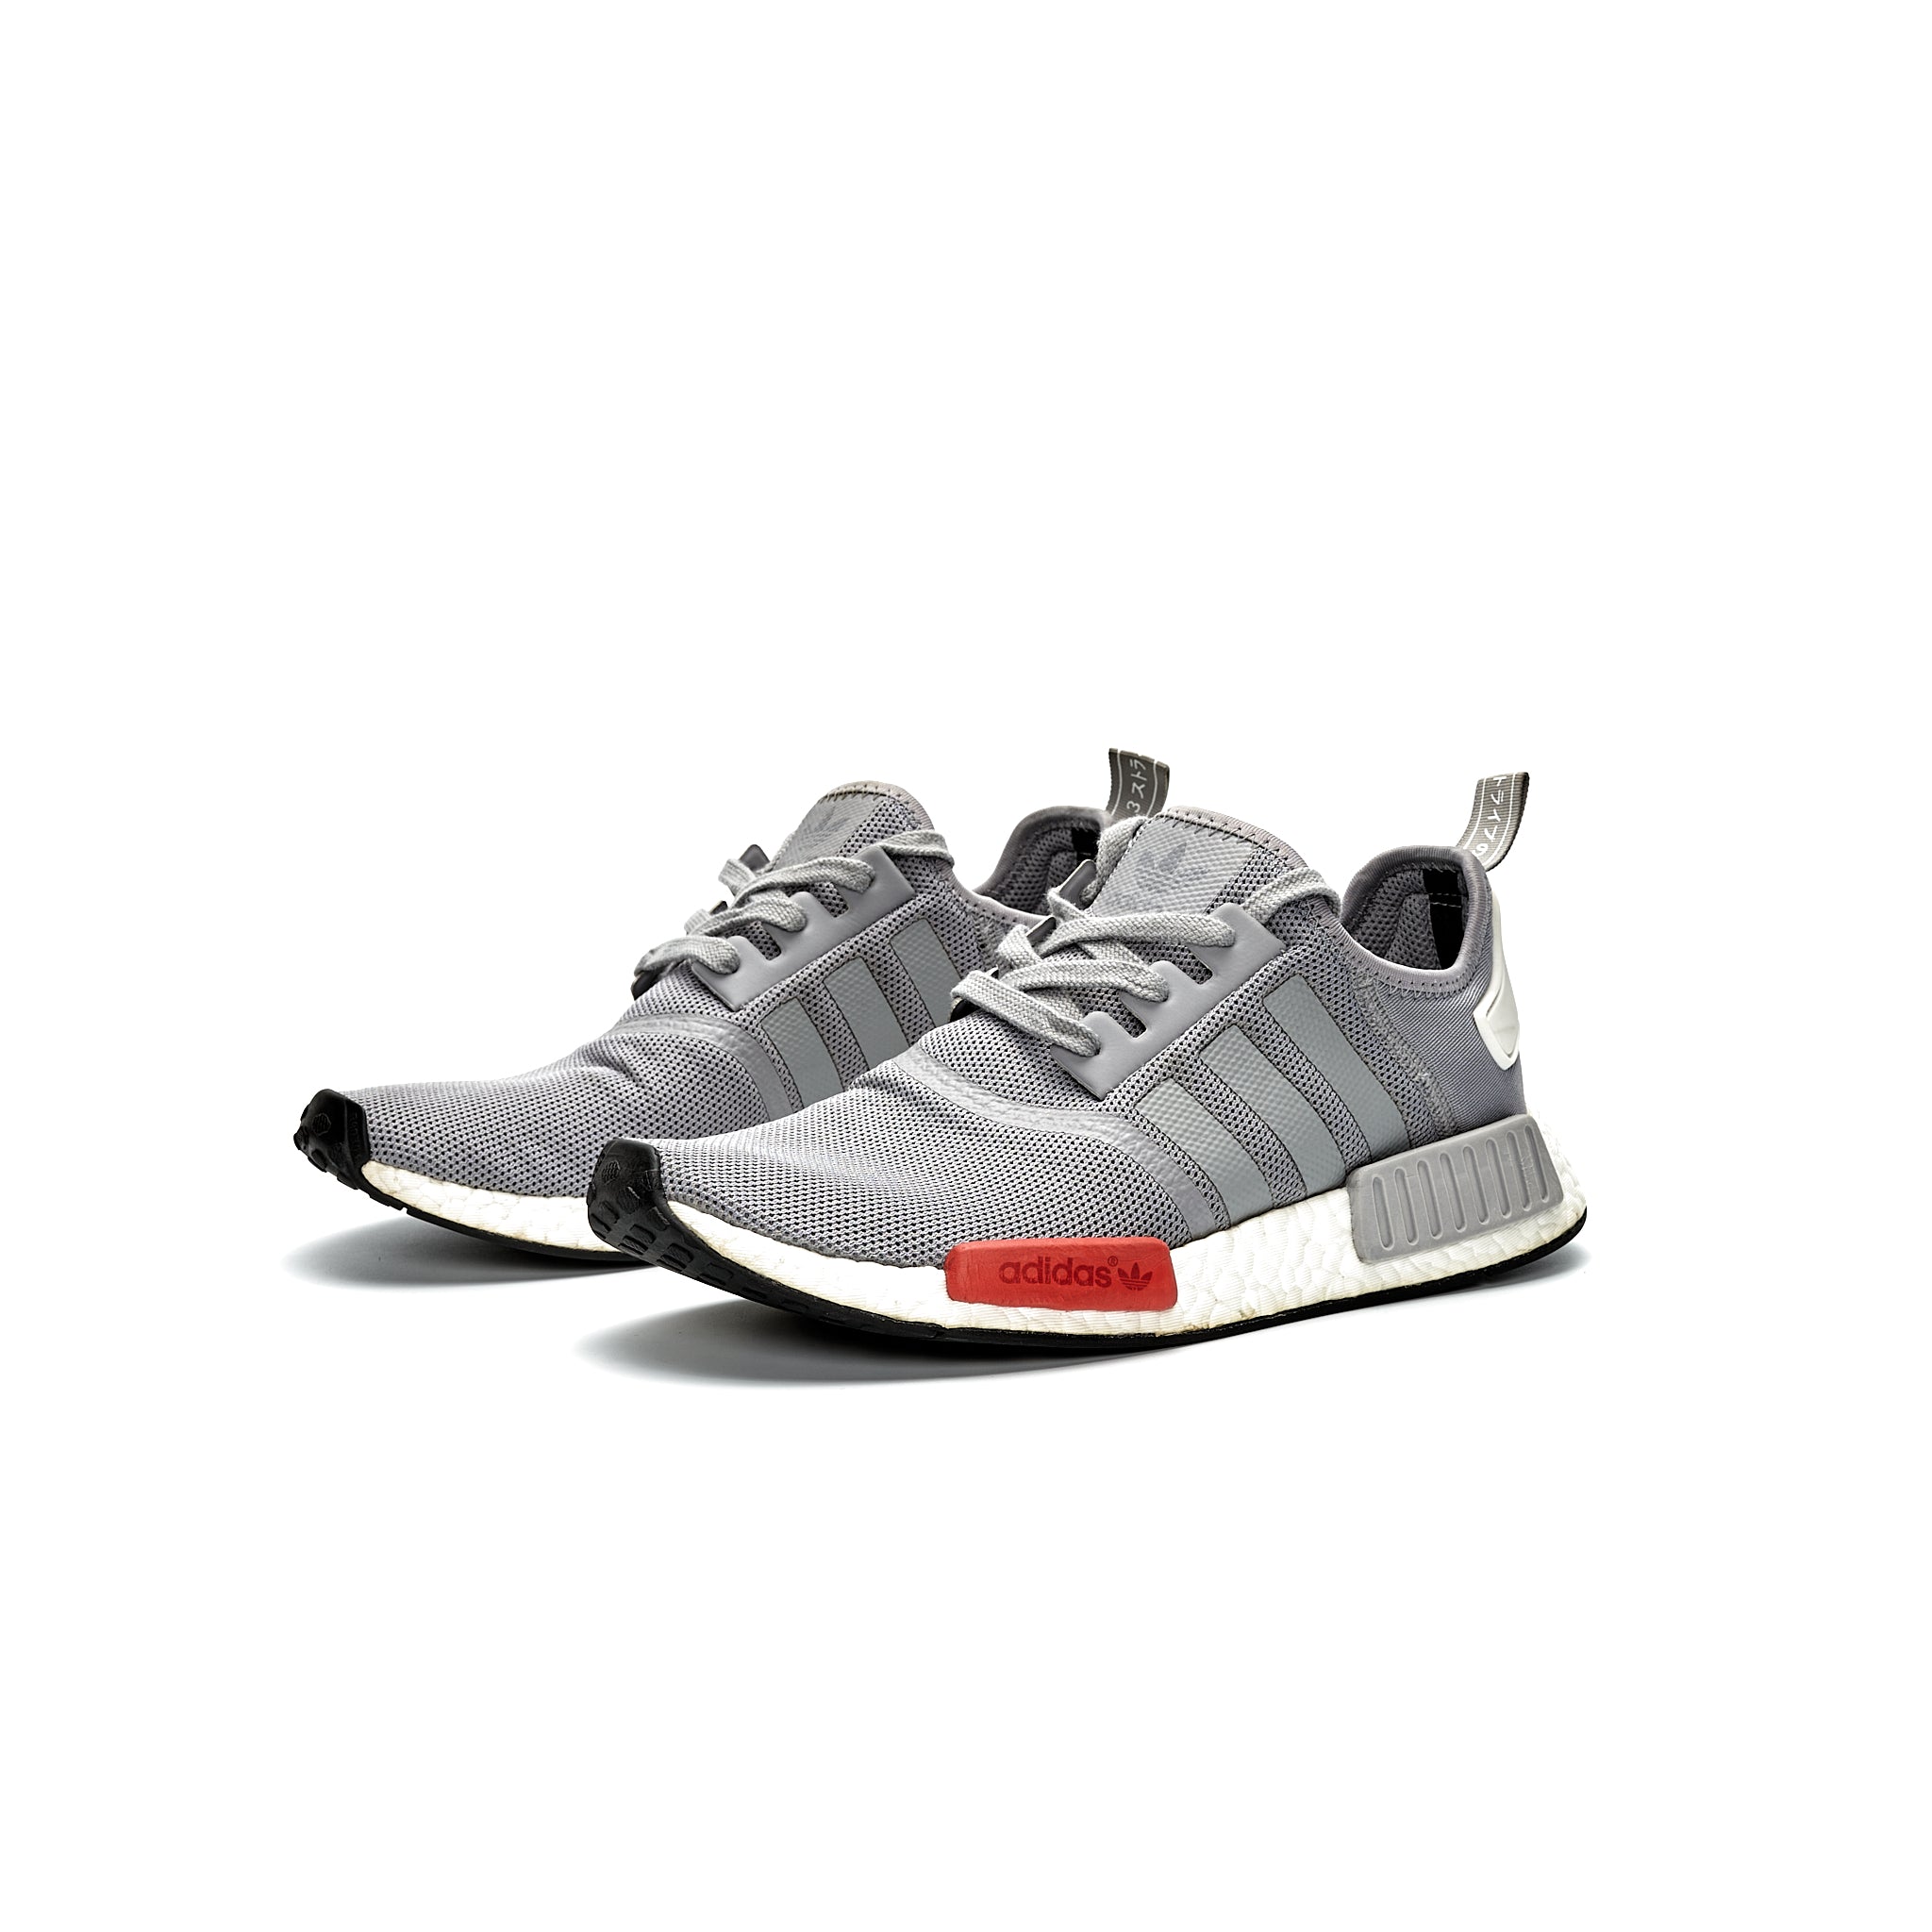 Adidas NMD R1 Light Story Cape Town